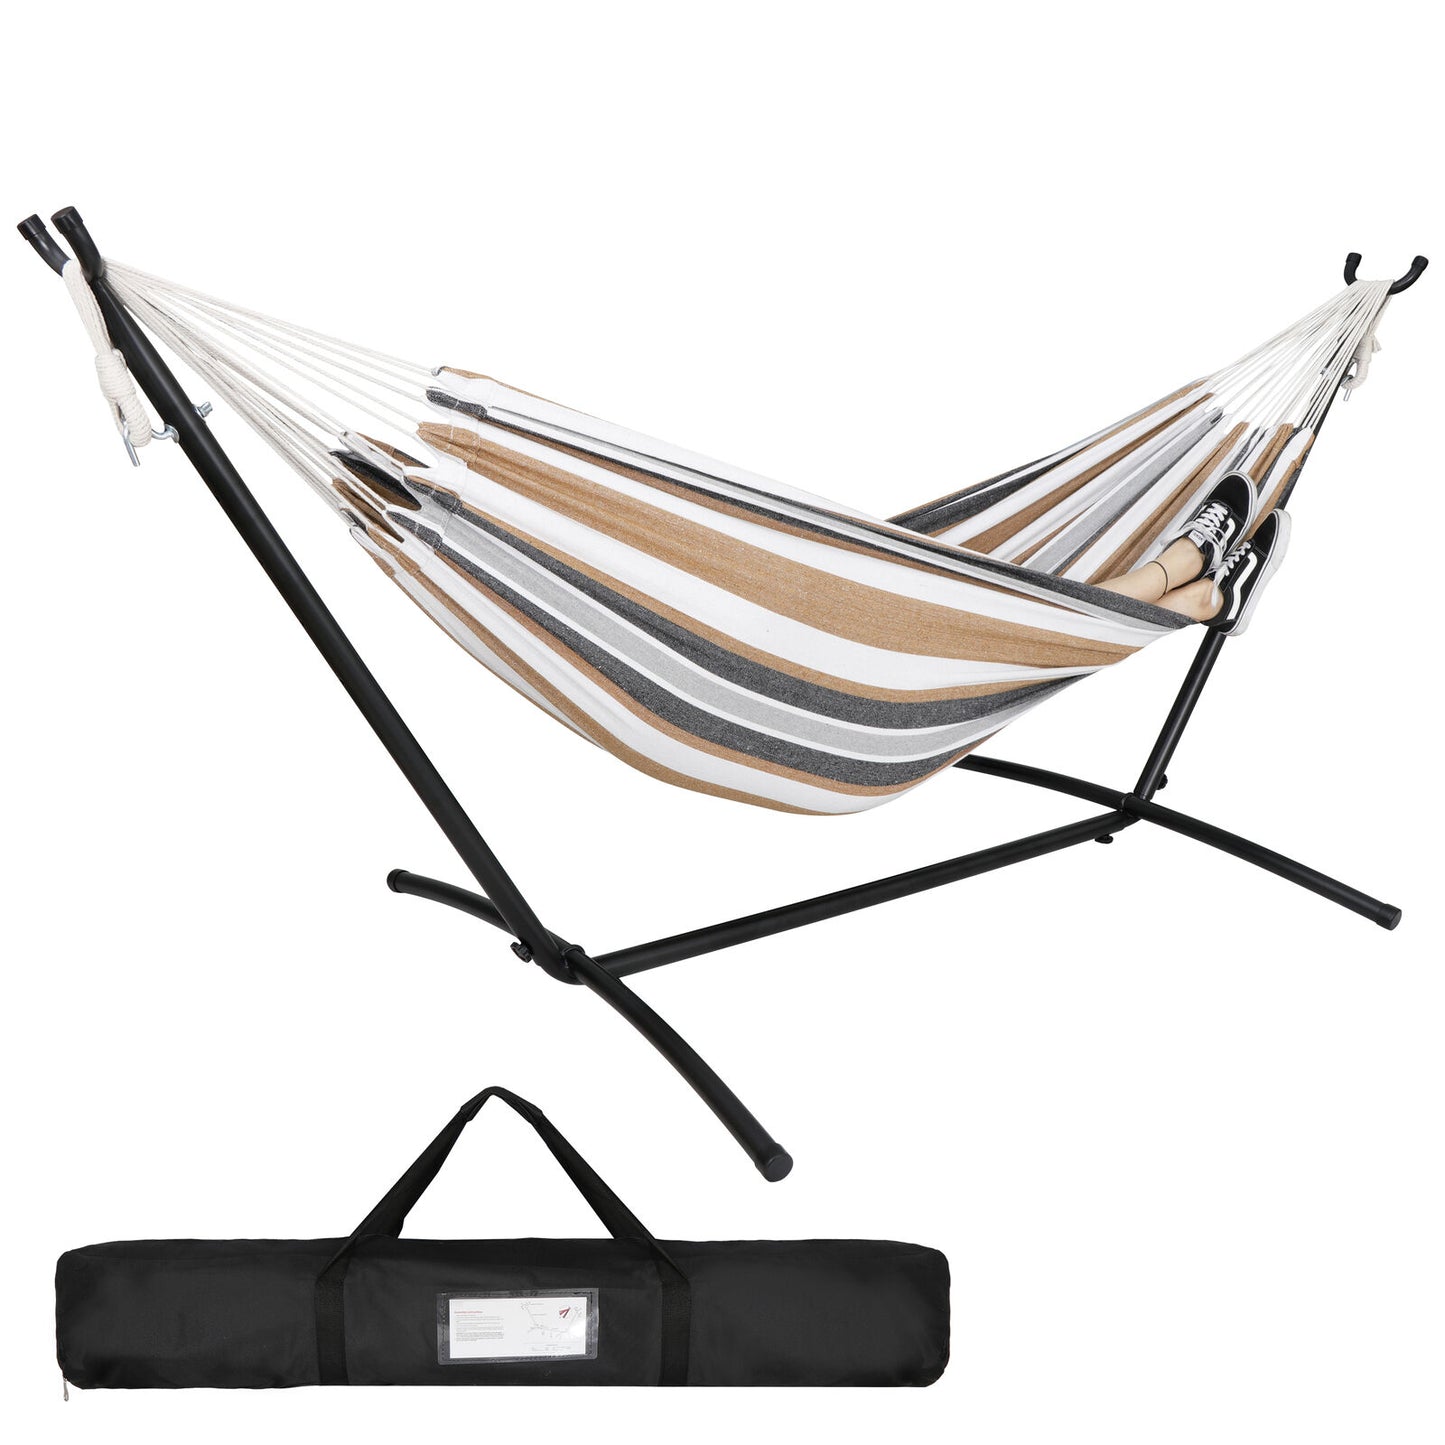 Portable Hammock with Stand for 2 person with Carrying case Outdoor Patio Use